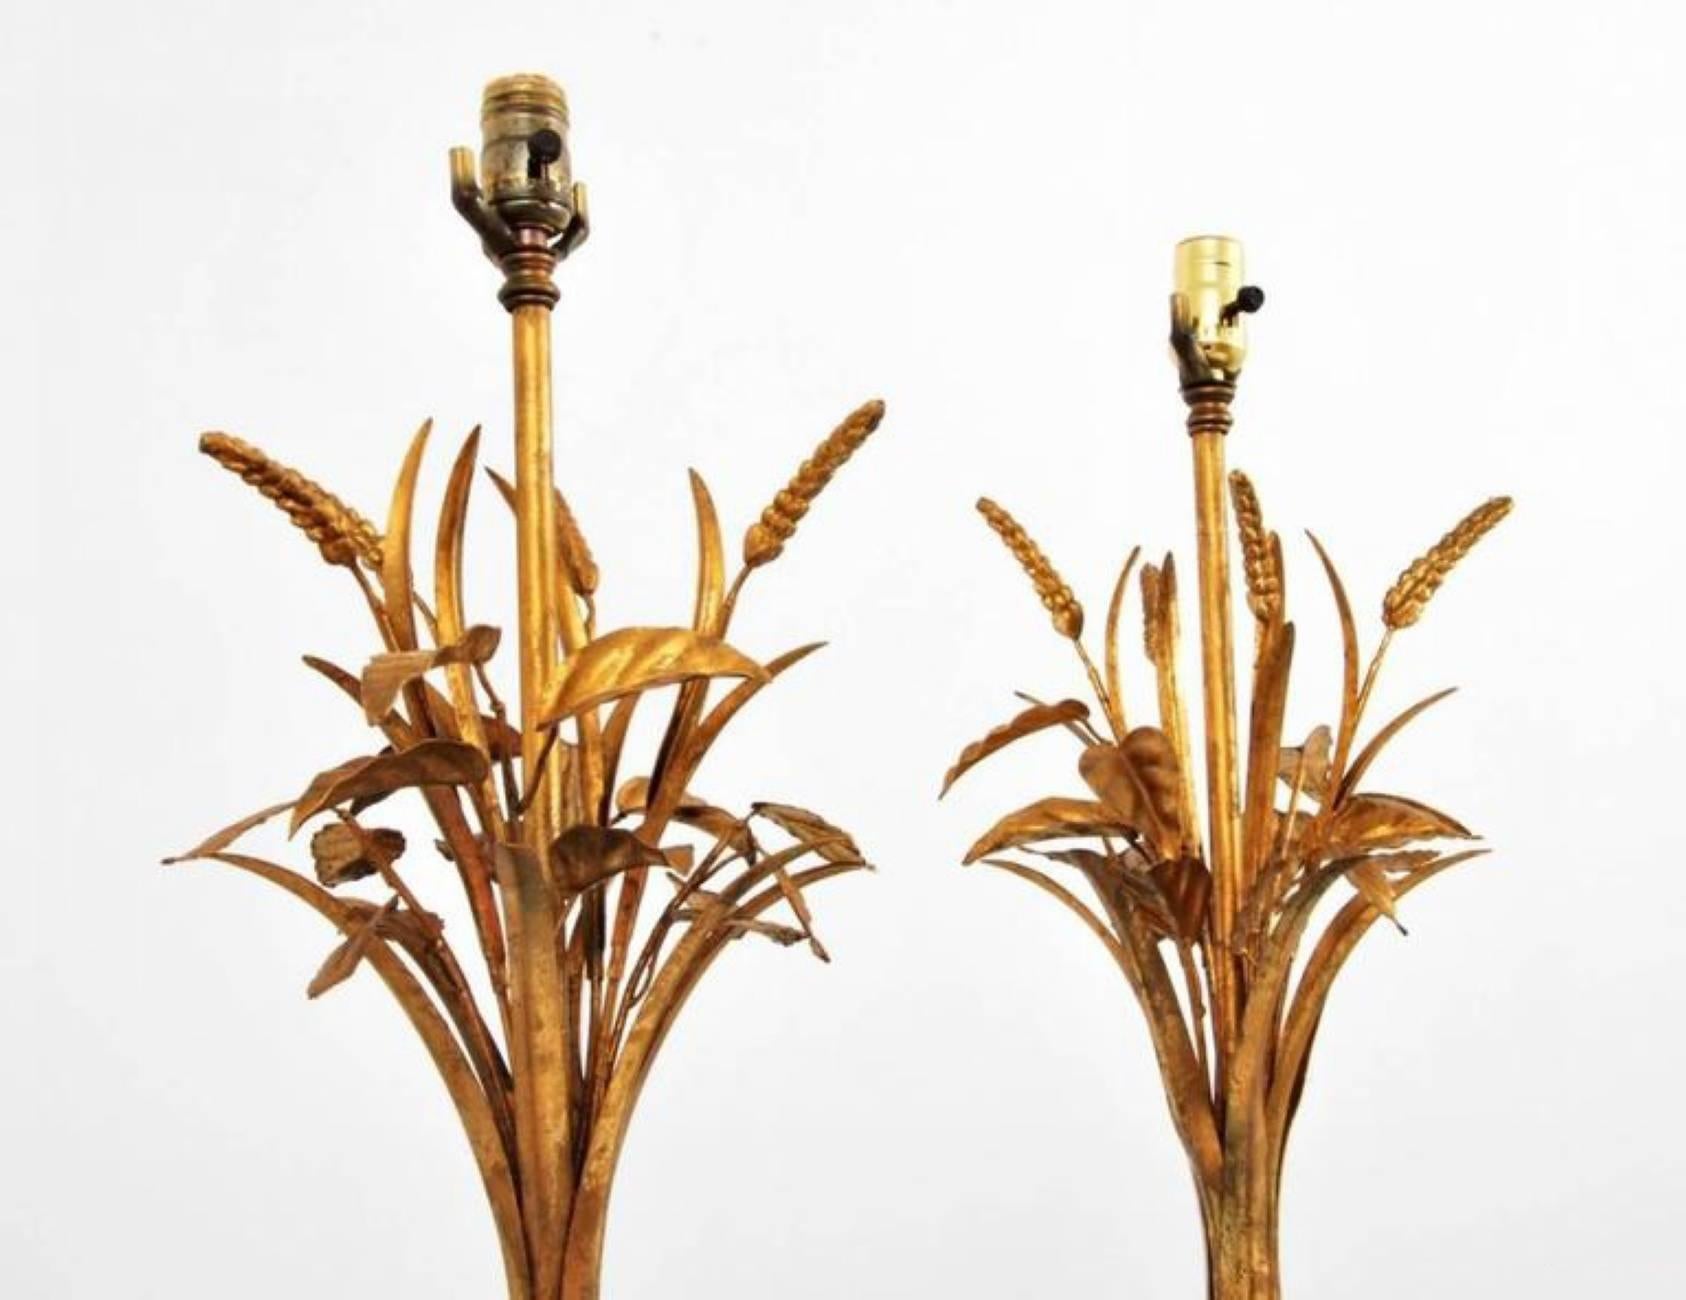 Fine pair of blown glass lamps with gold aventurine throughout and decorative metal elements attributed to Barovier & Toso, Murano, Italy.